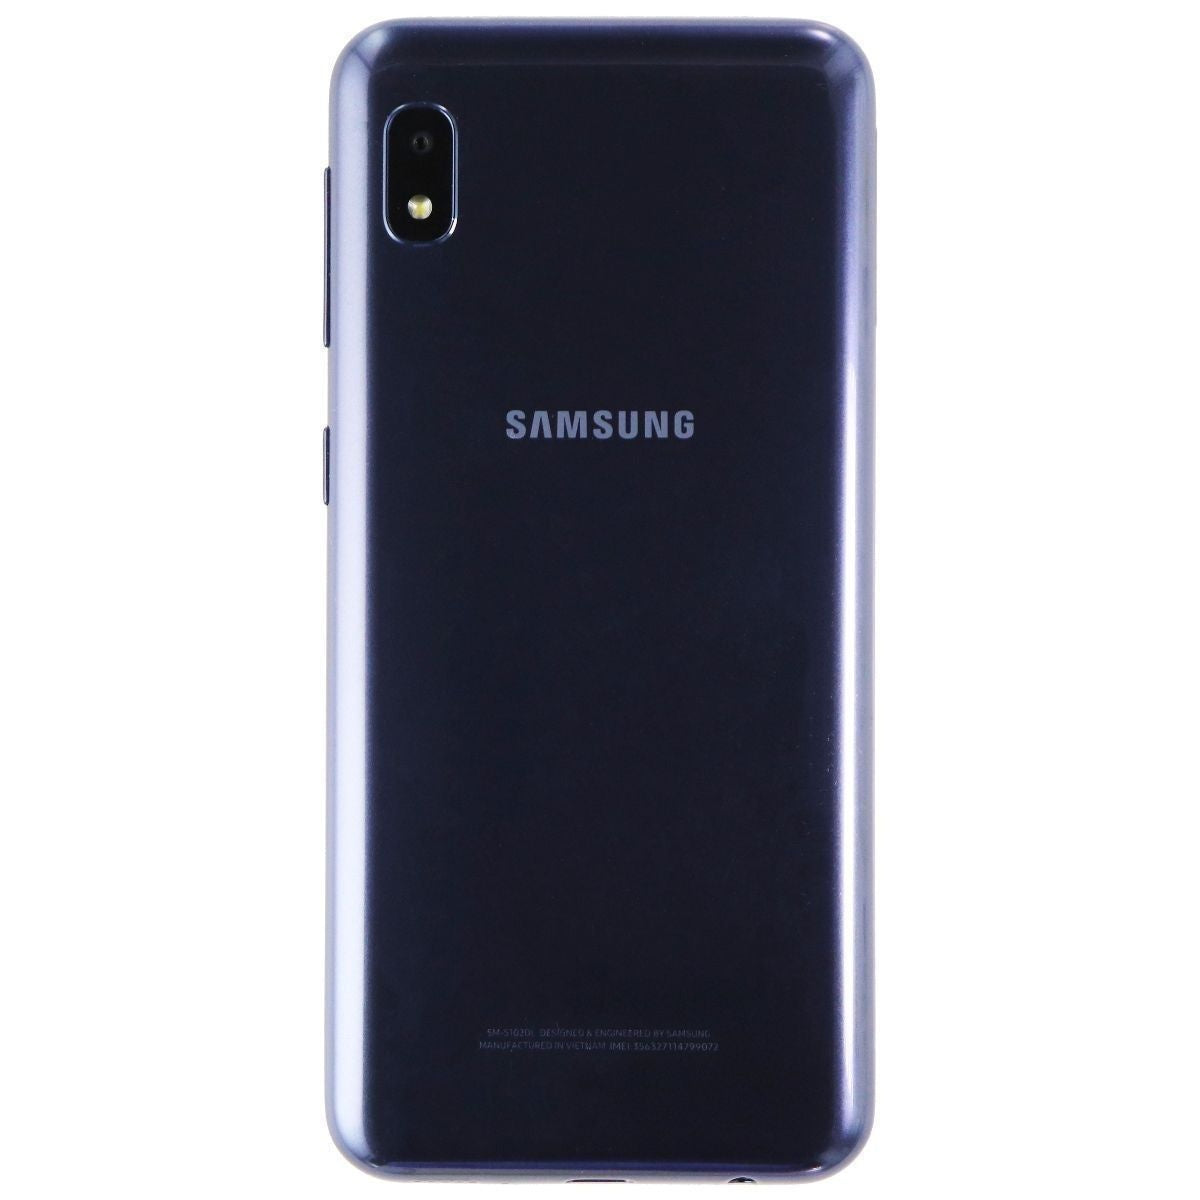 Samsung Galaxy A10e (5.8-in) SM-A102U (T-Mobile Only) - 32GB / Black Cell Phones & Smartphones Samsung    - Simple Cell Bulk Wholesale Pricing - USA Seller